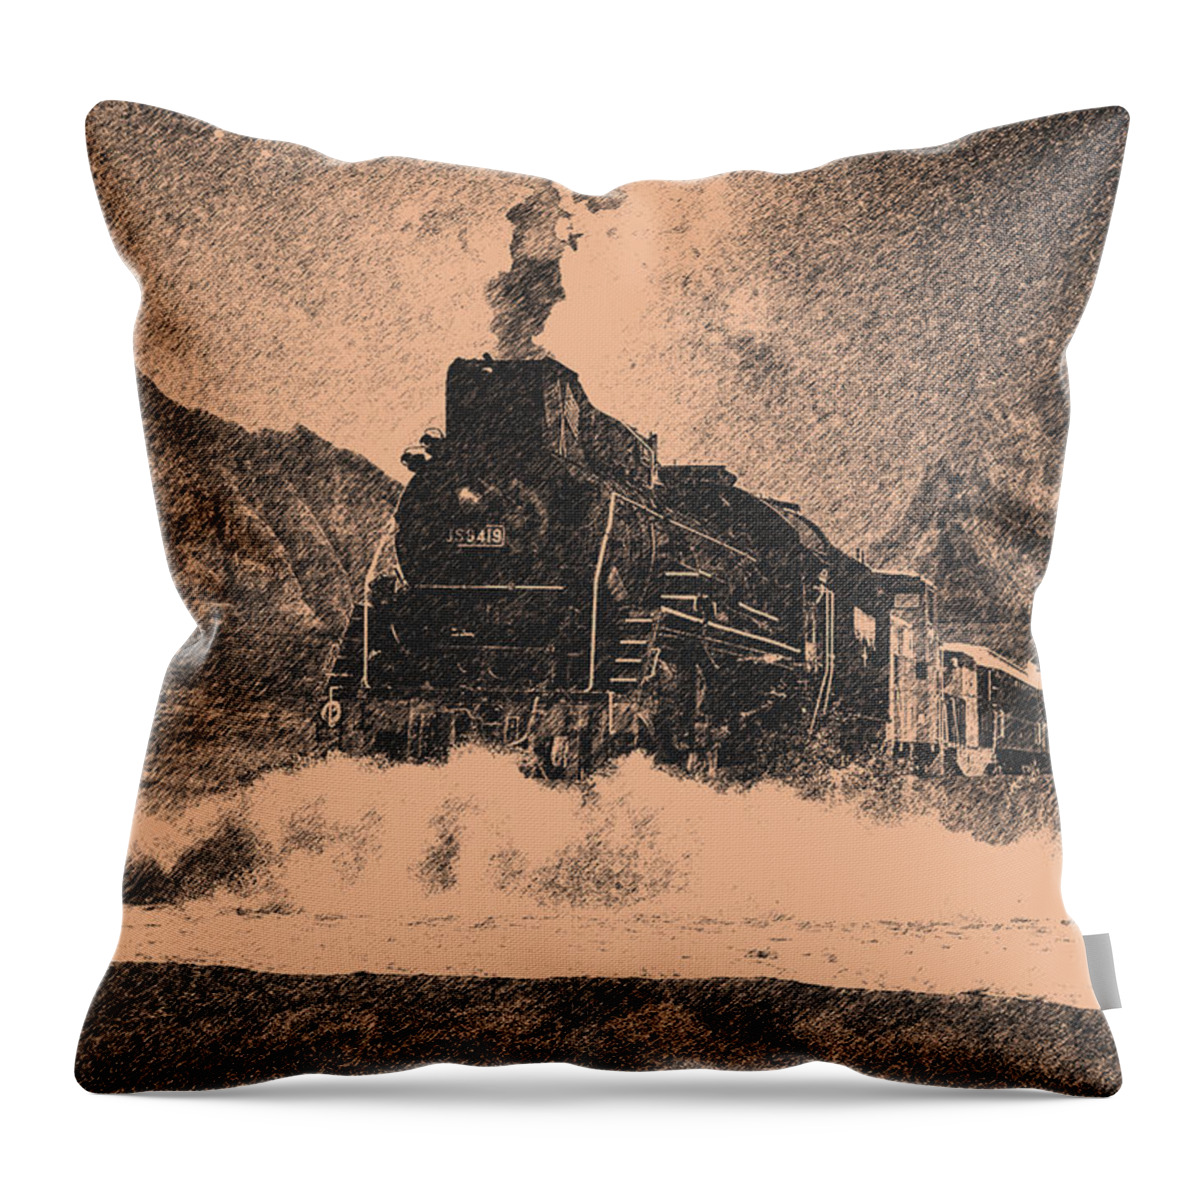 Water Throw Pillow featuring the digital art Water Train by Piotr Dulski